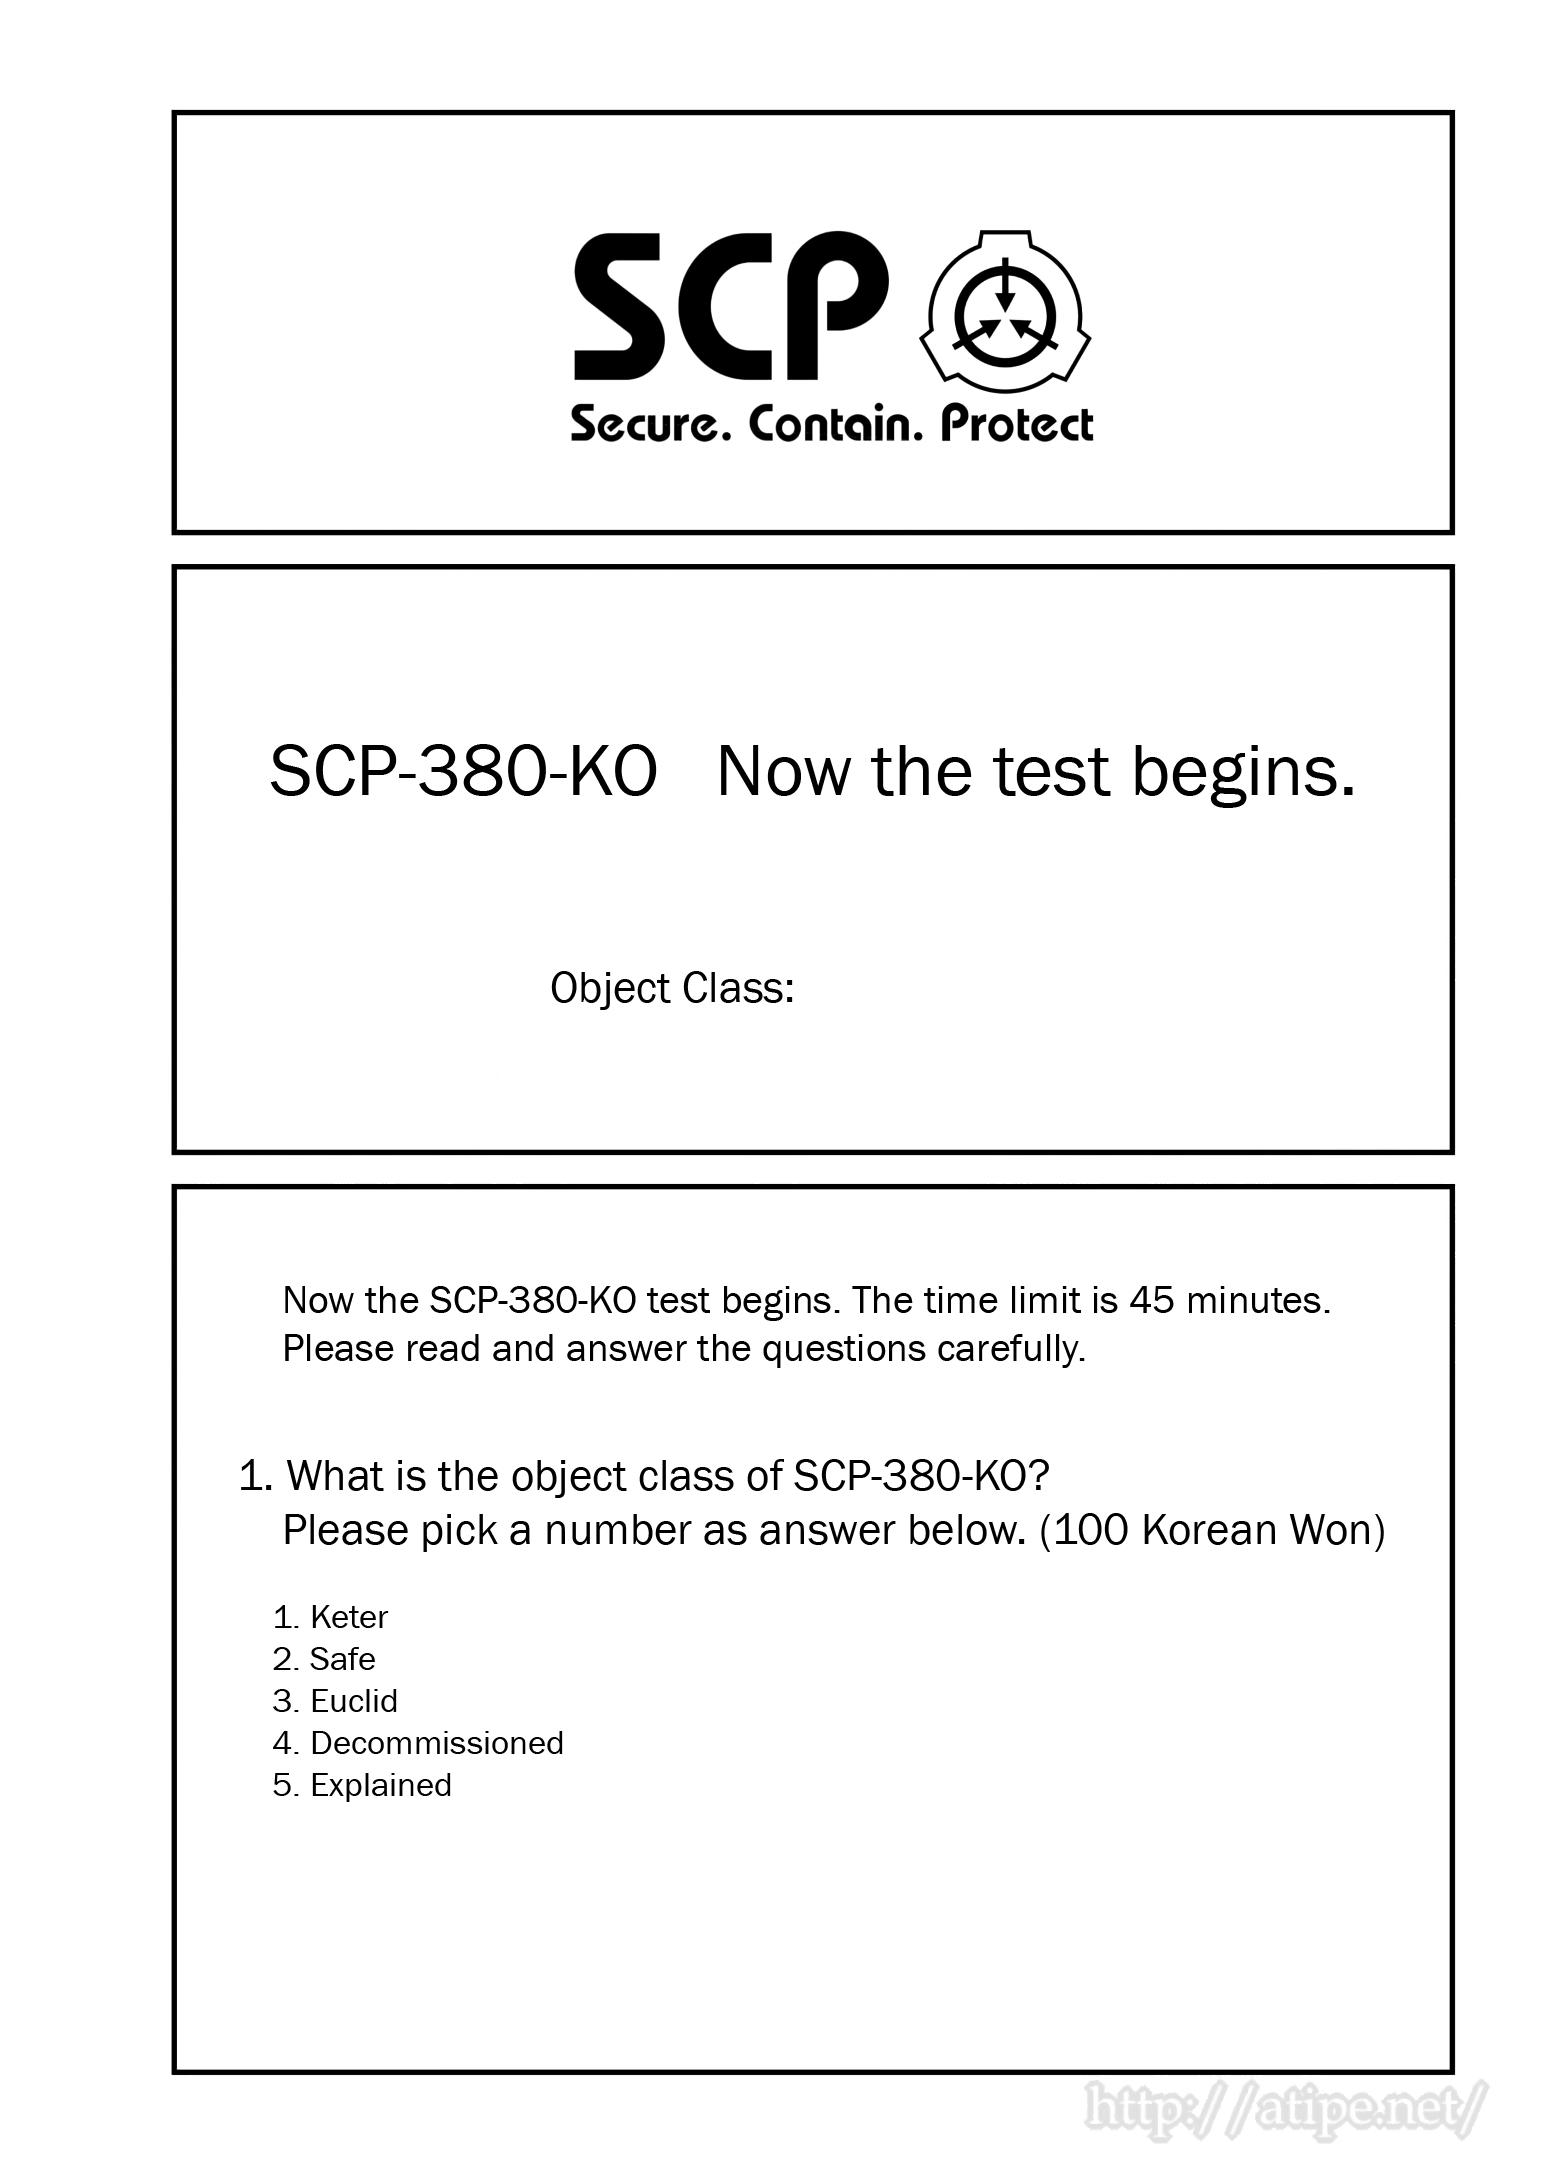 SCP Object Classes Explained